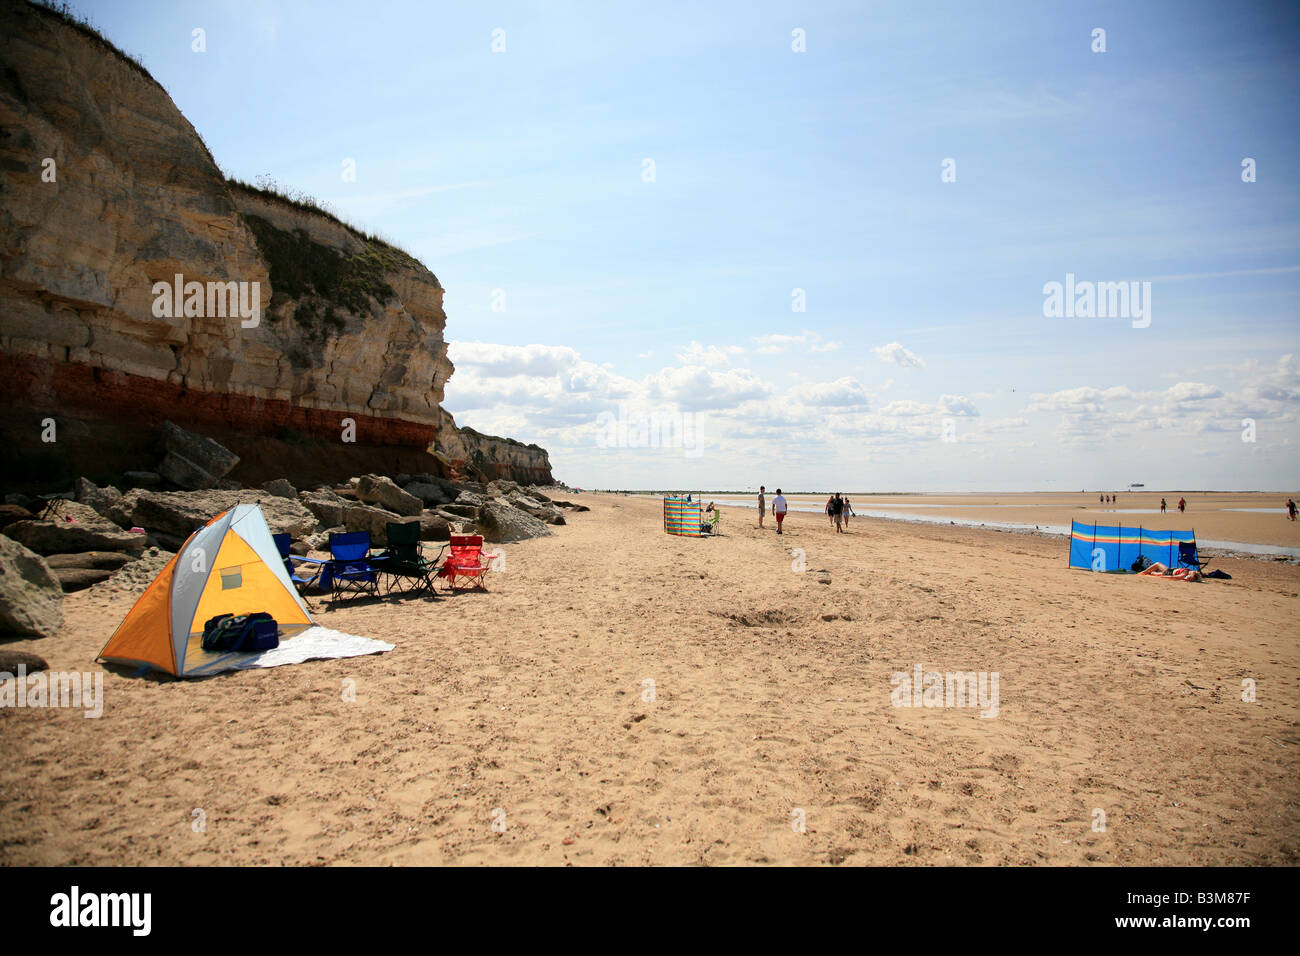 Wind Shelter on the Beach at Old Hunstanton, Norfolk Stock Photo